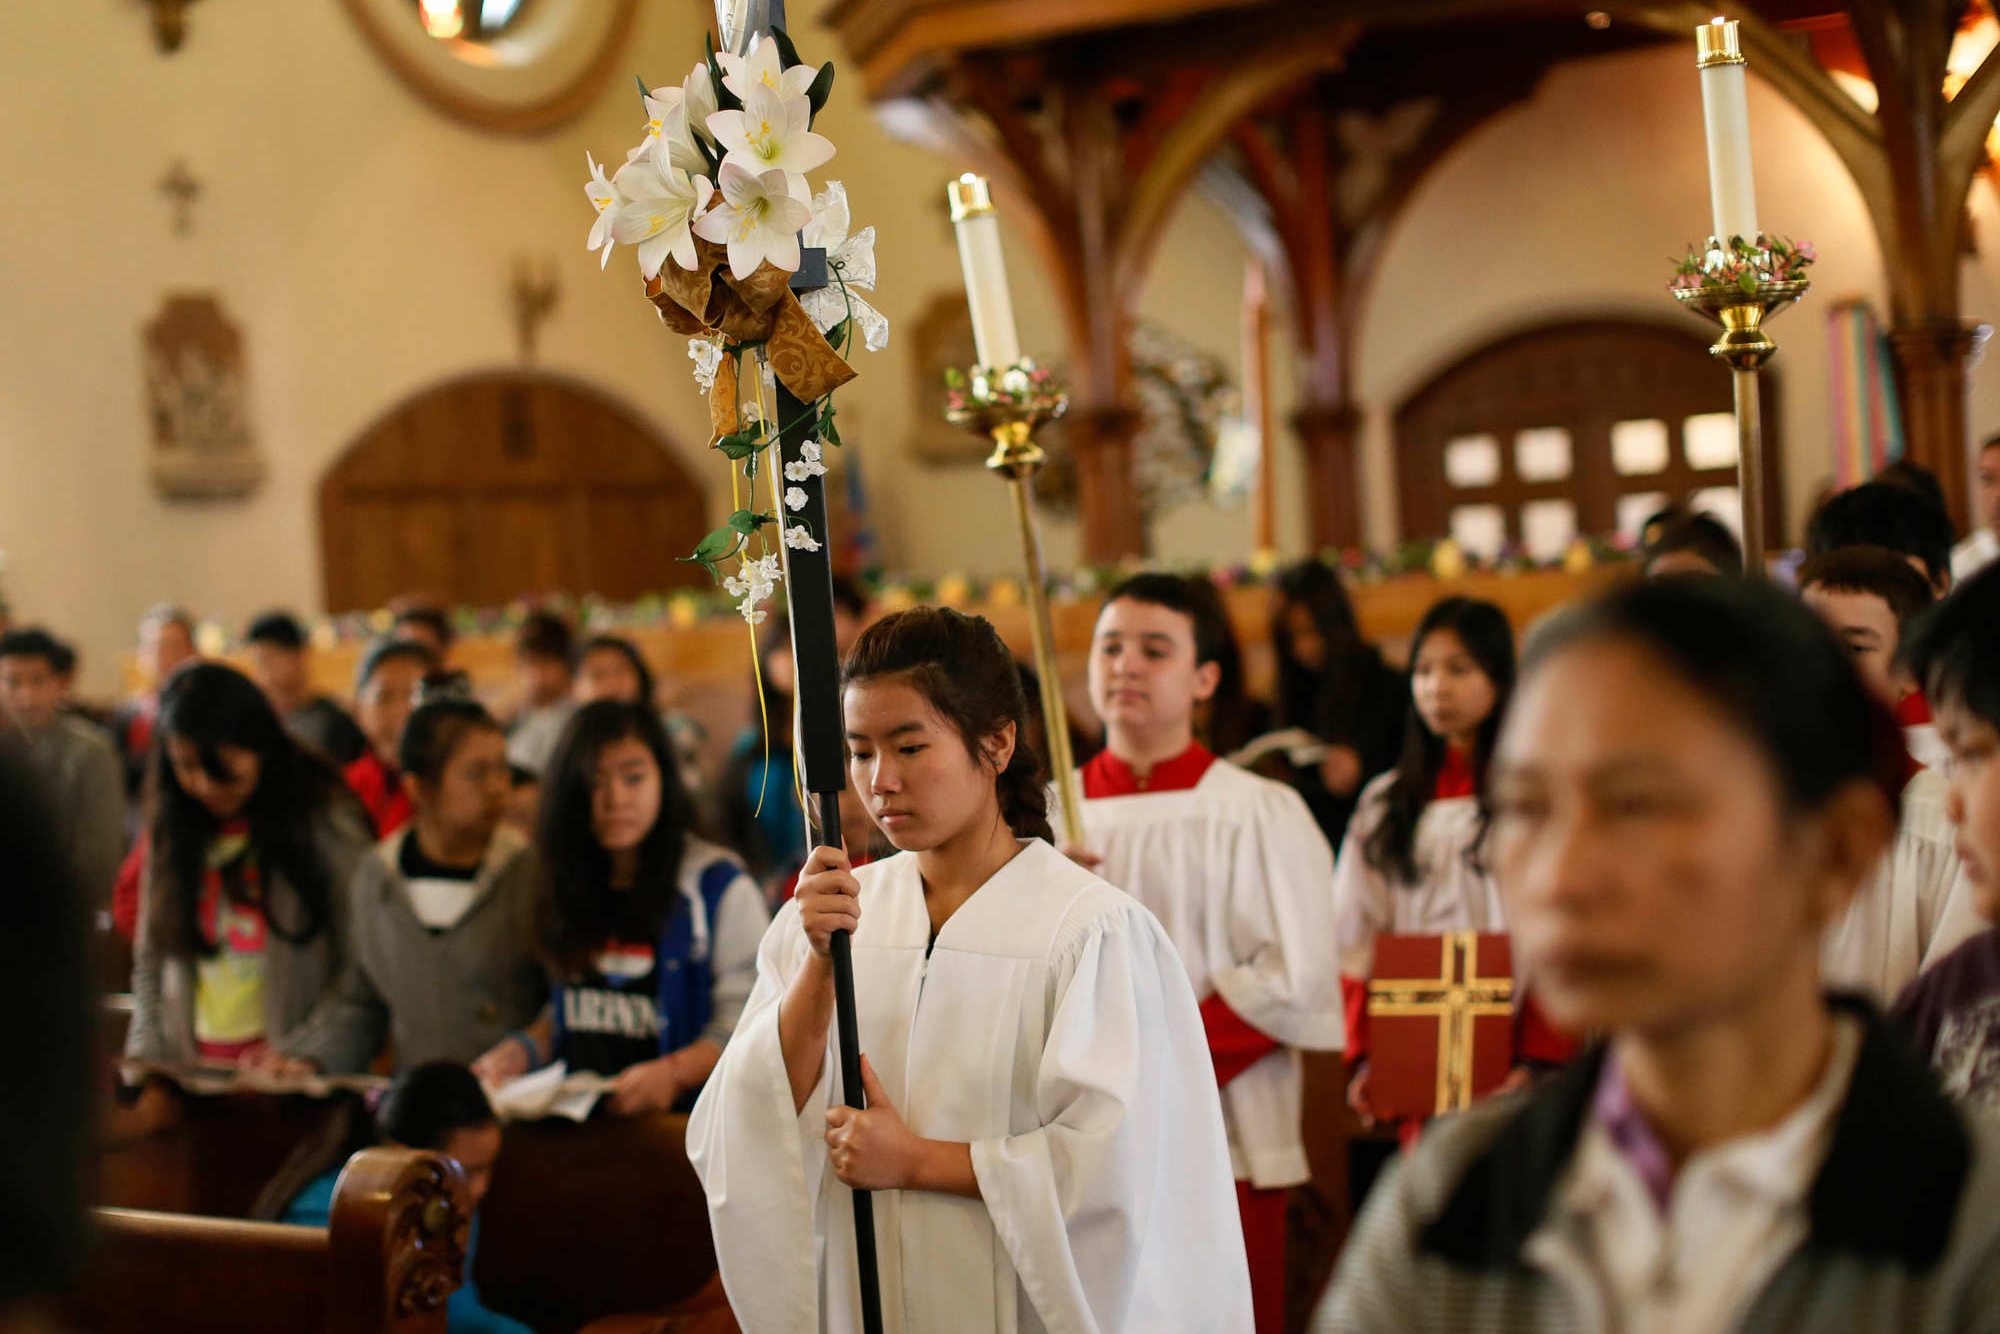 Beh Meh carries the cross to lead the processional at the start of Mass at Our Lady of Hope, April 19, 2015. (Derek Gee/Buffalo News)